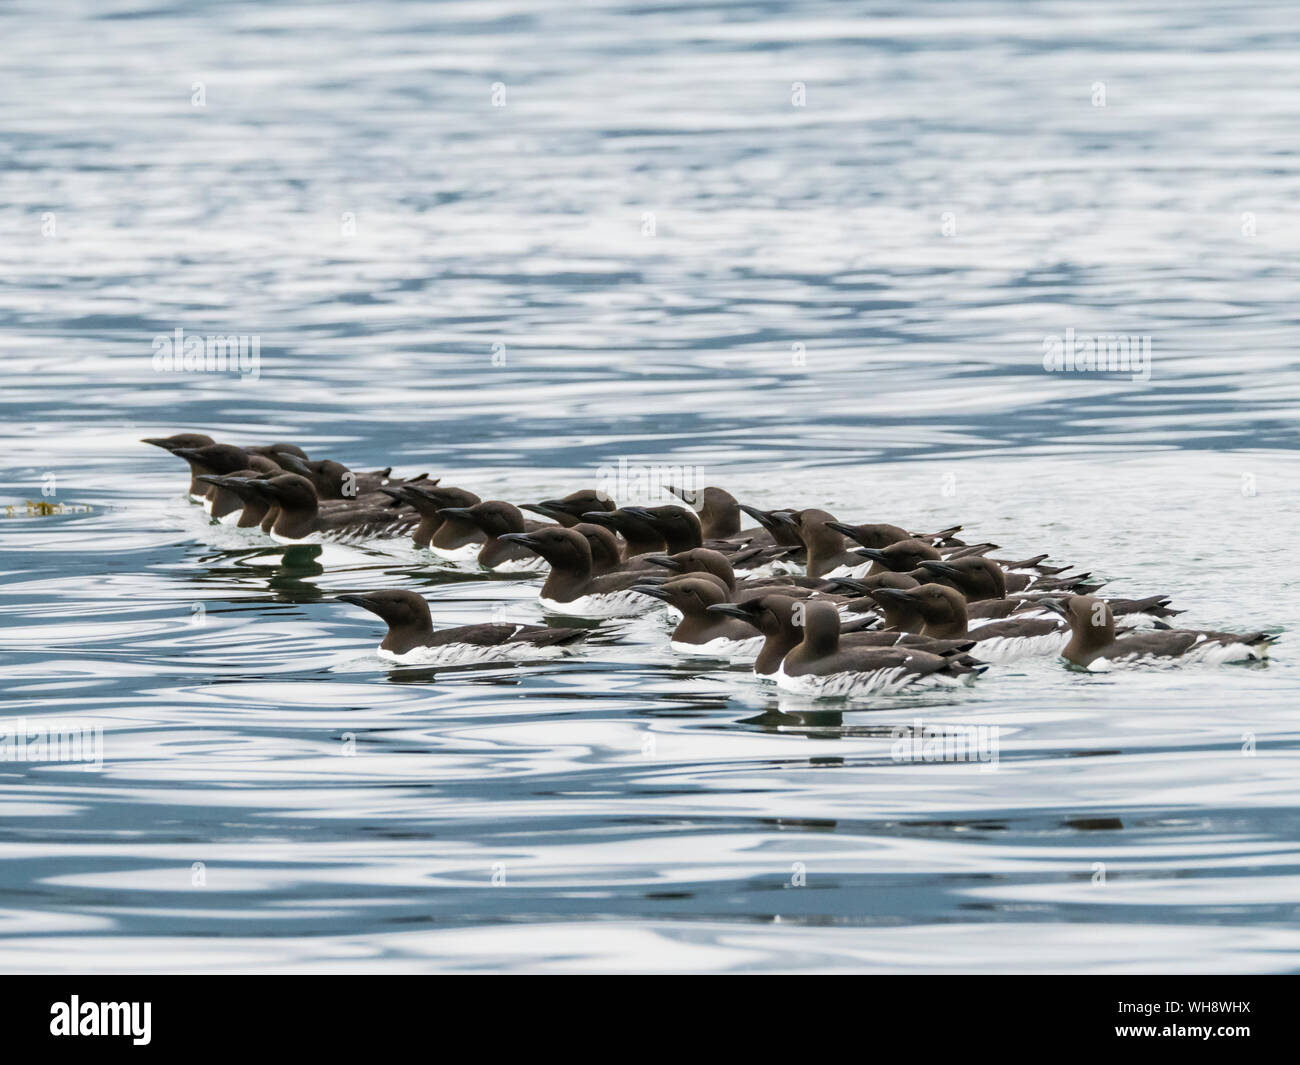 A raft of common murres (Uria aalge) at breeding site on South Marble Island, Glacier Bay National Park, Alaska, United States of America Stock Photo